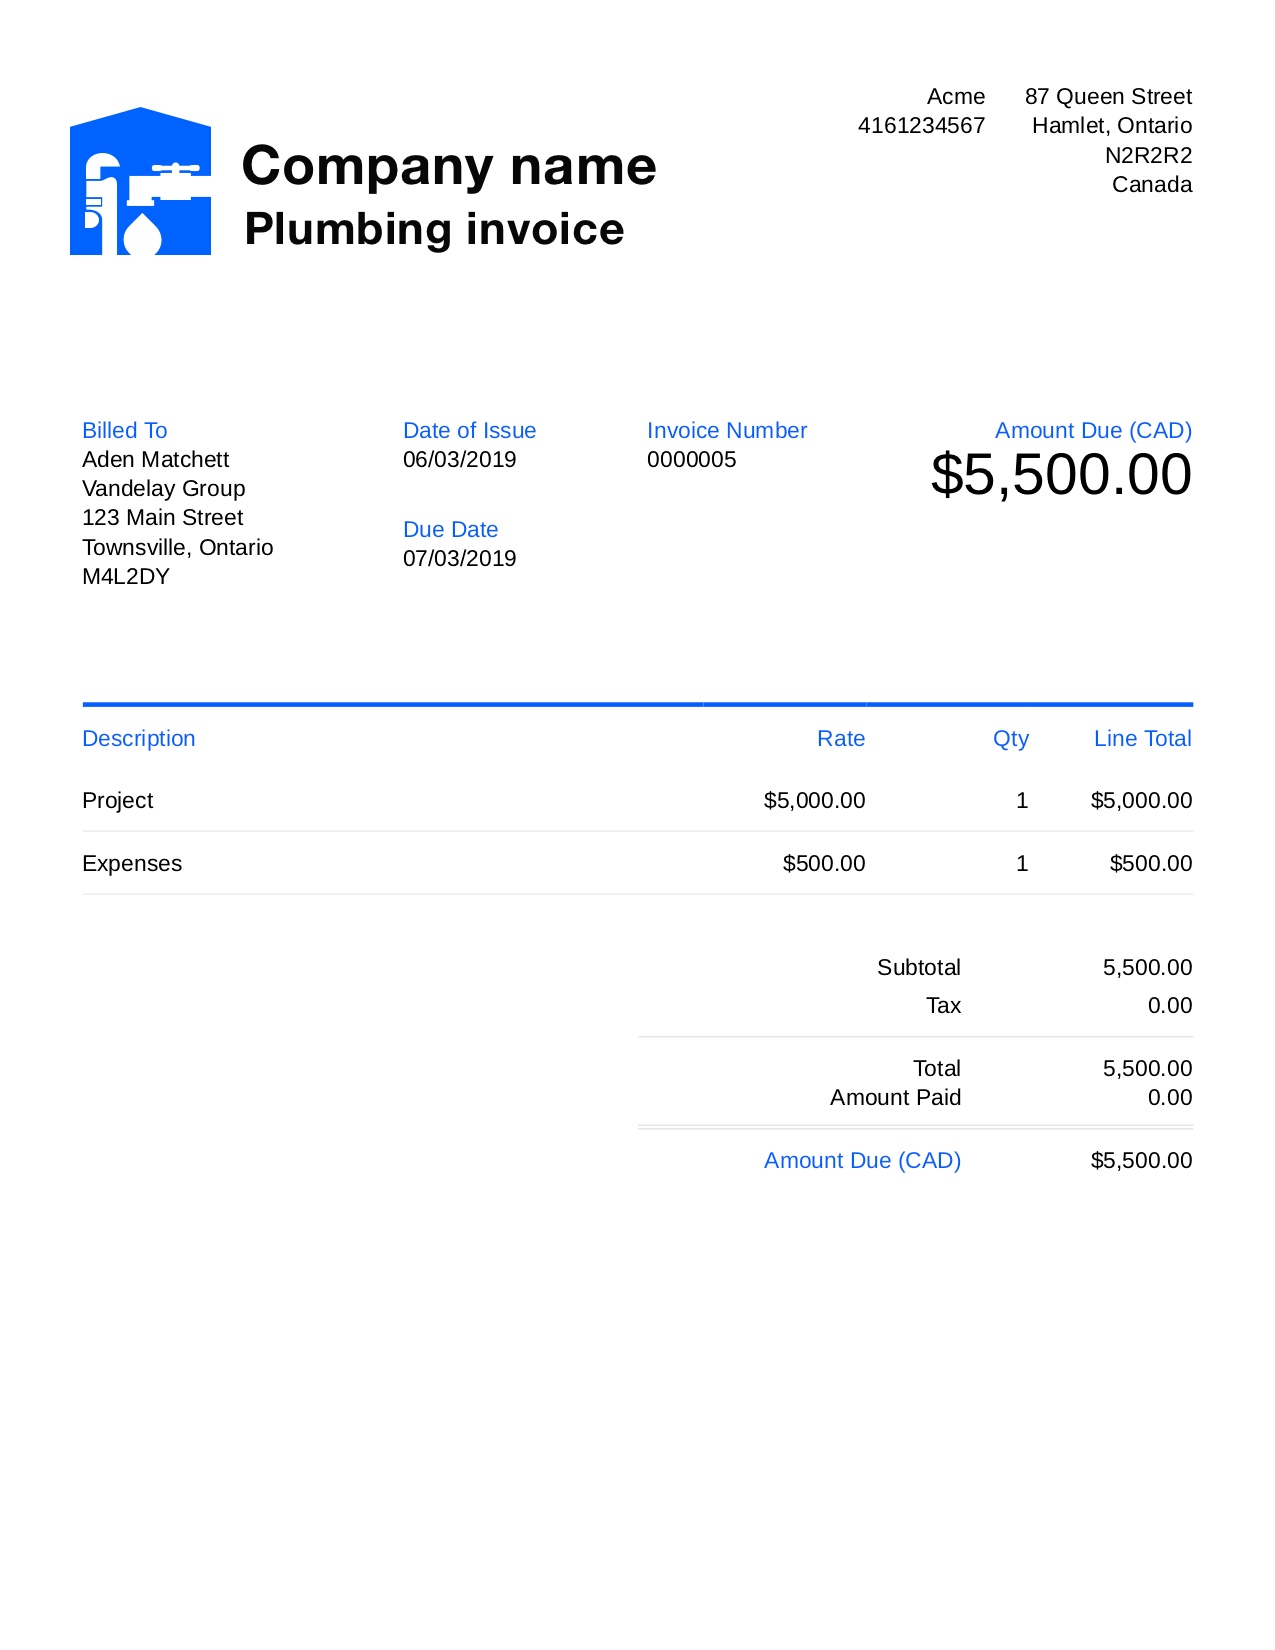 Free Plumbing Invoice Template. Customize and Send in 90 Seconds